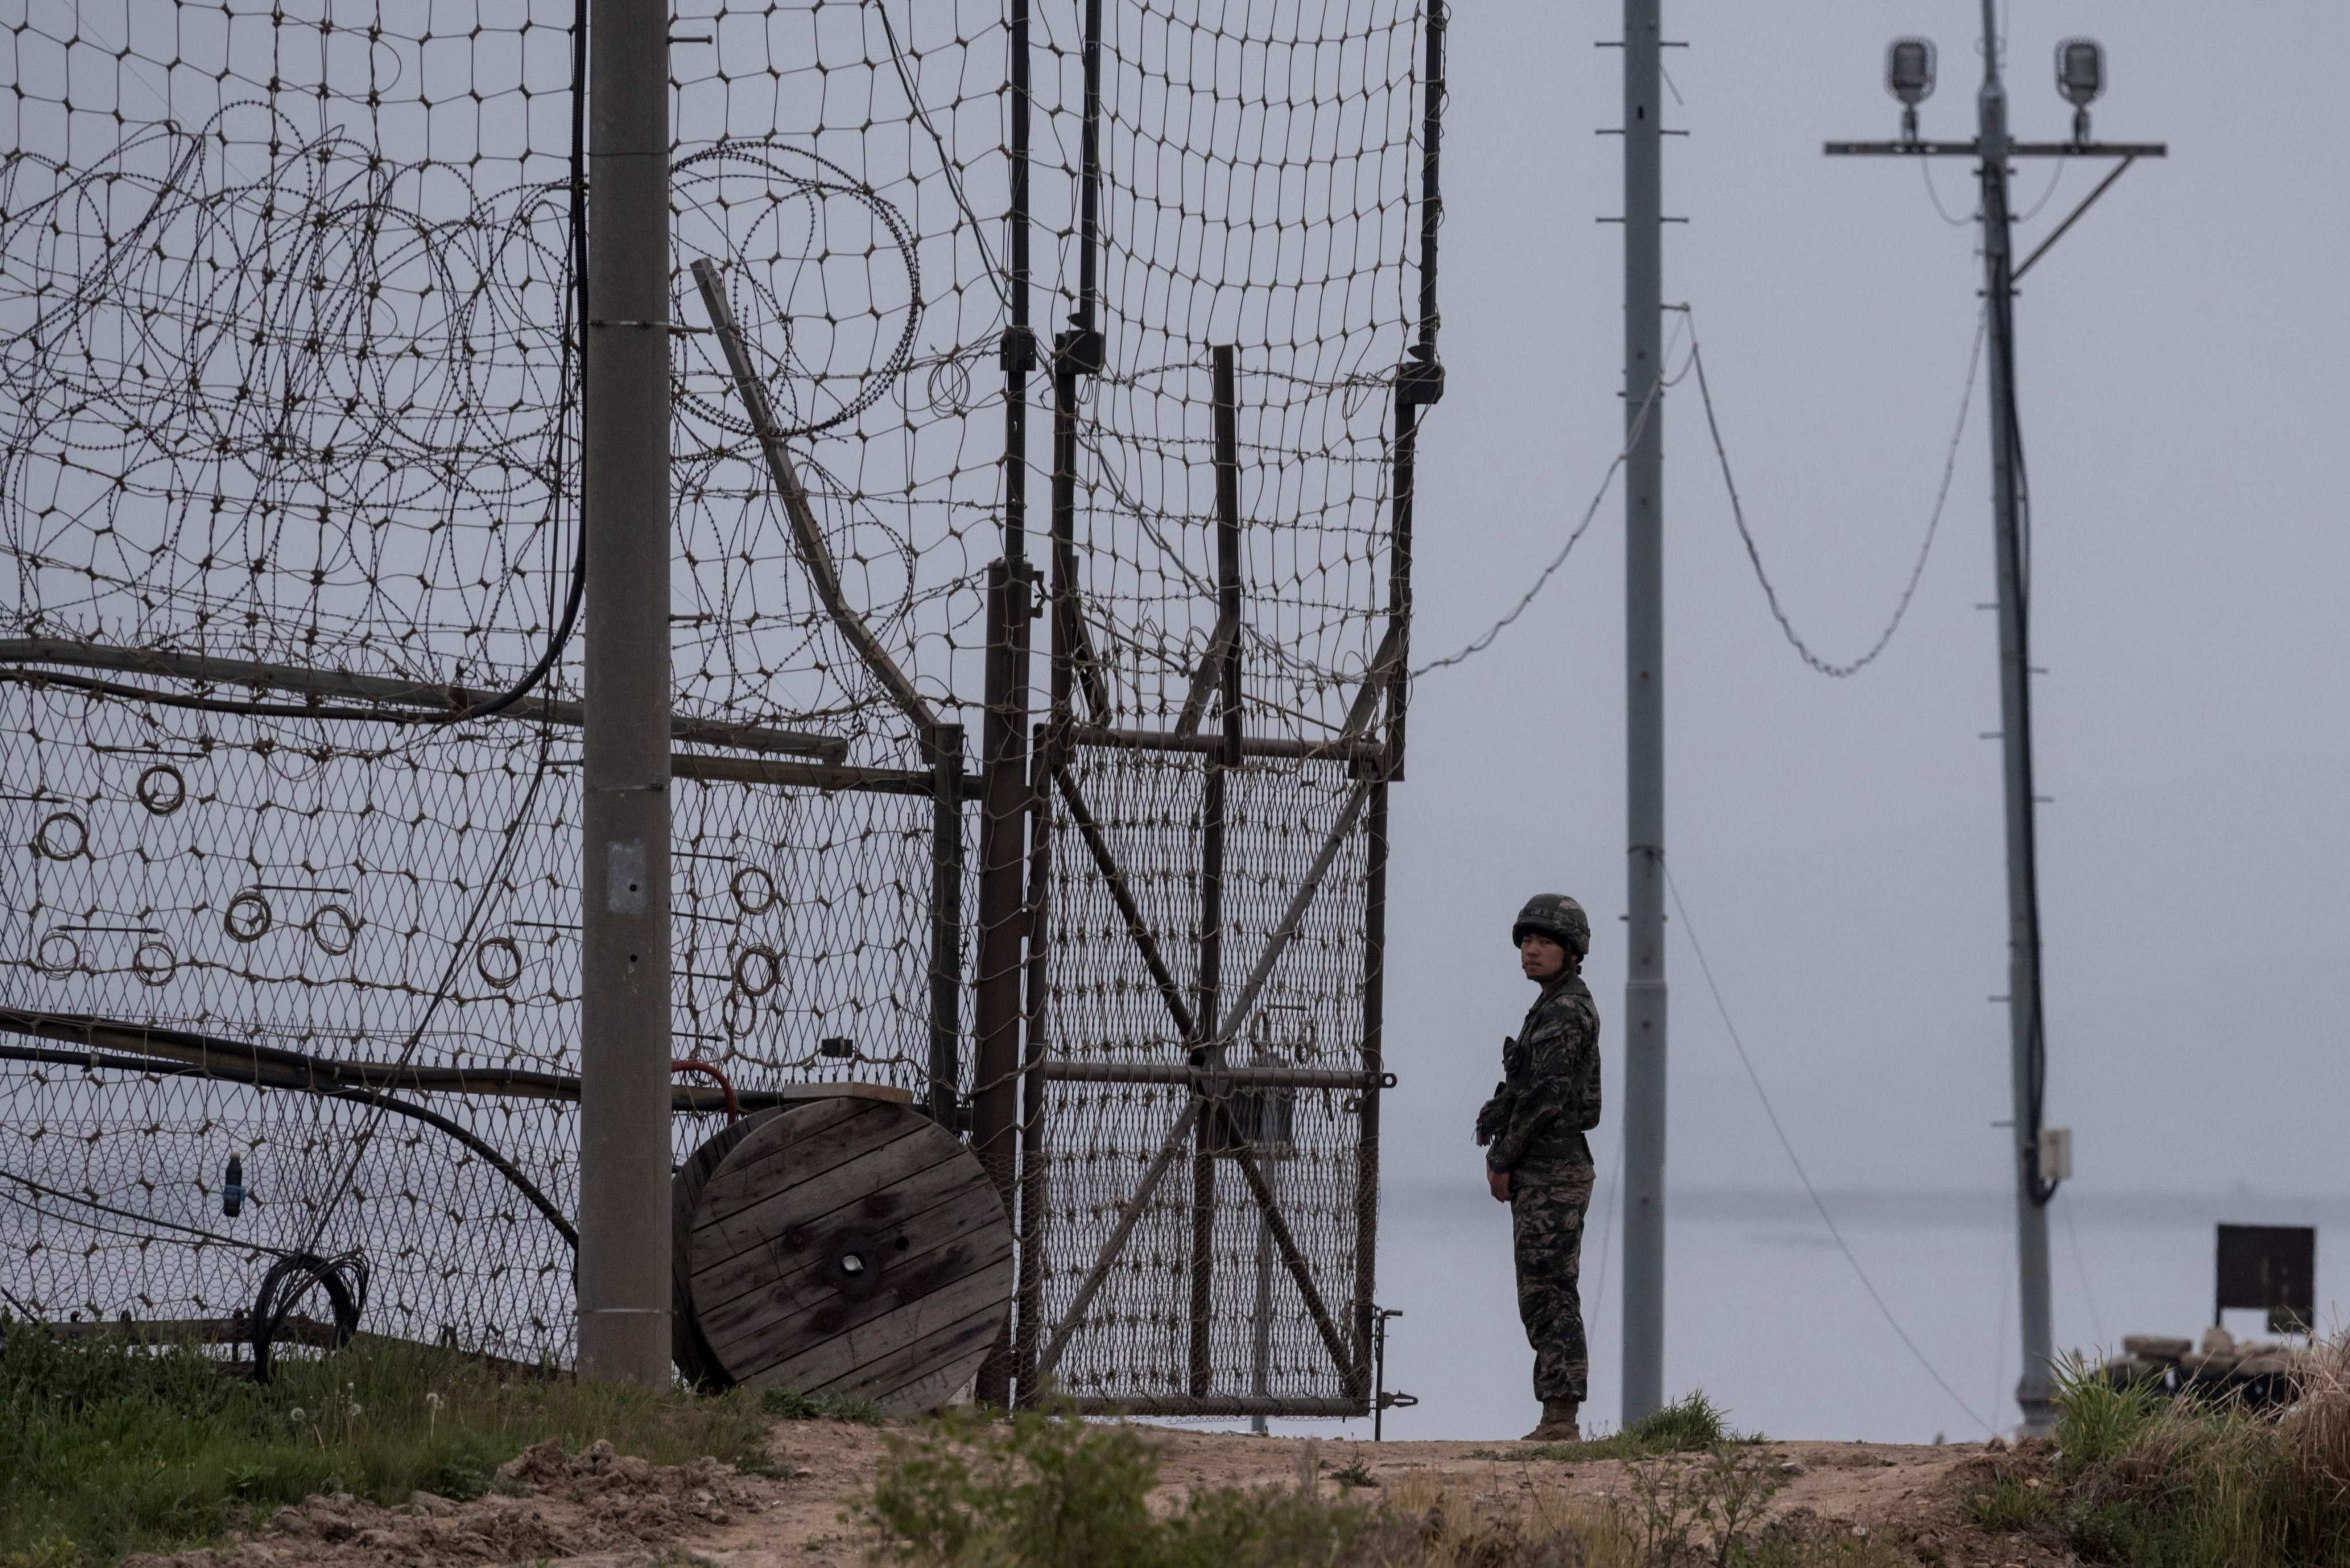 The so-called Demilitarised Zone (DMZ) separates North and South Korea. Photo: AFP